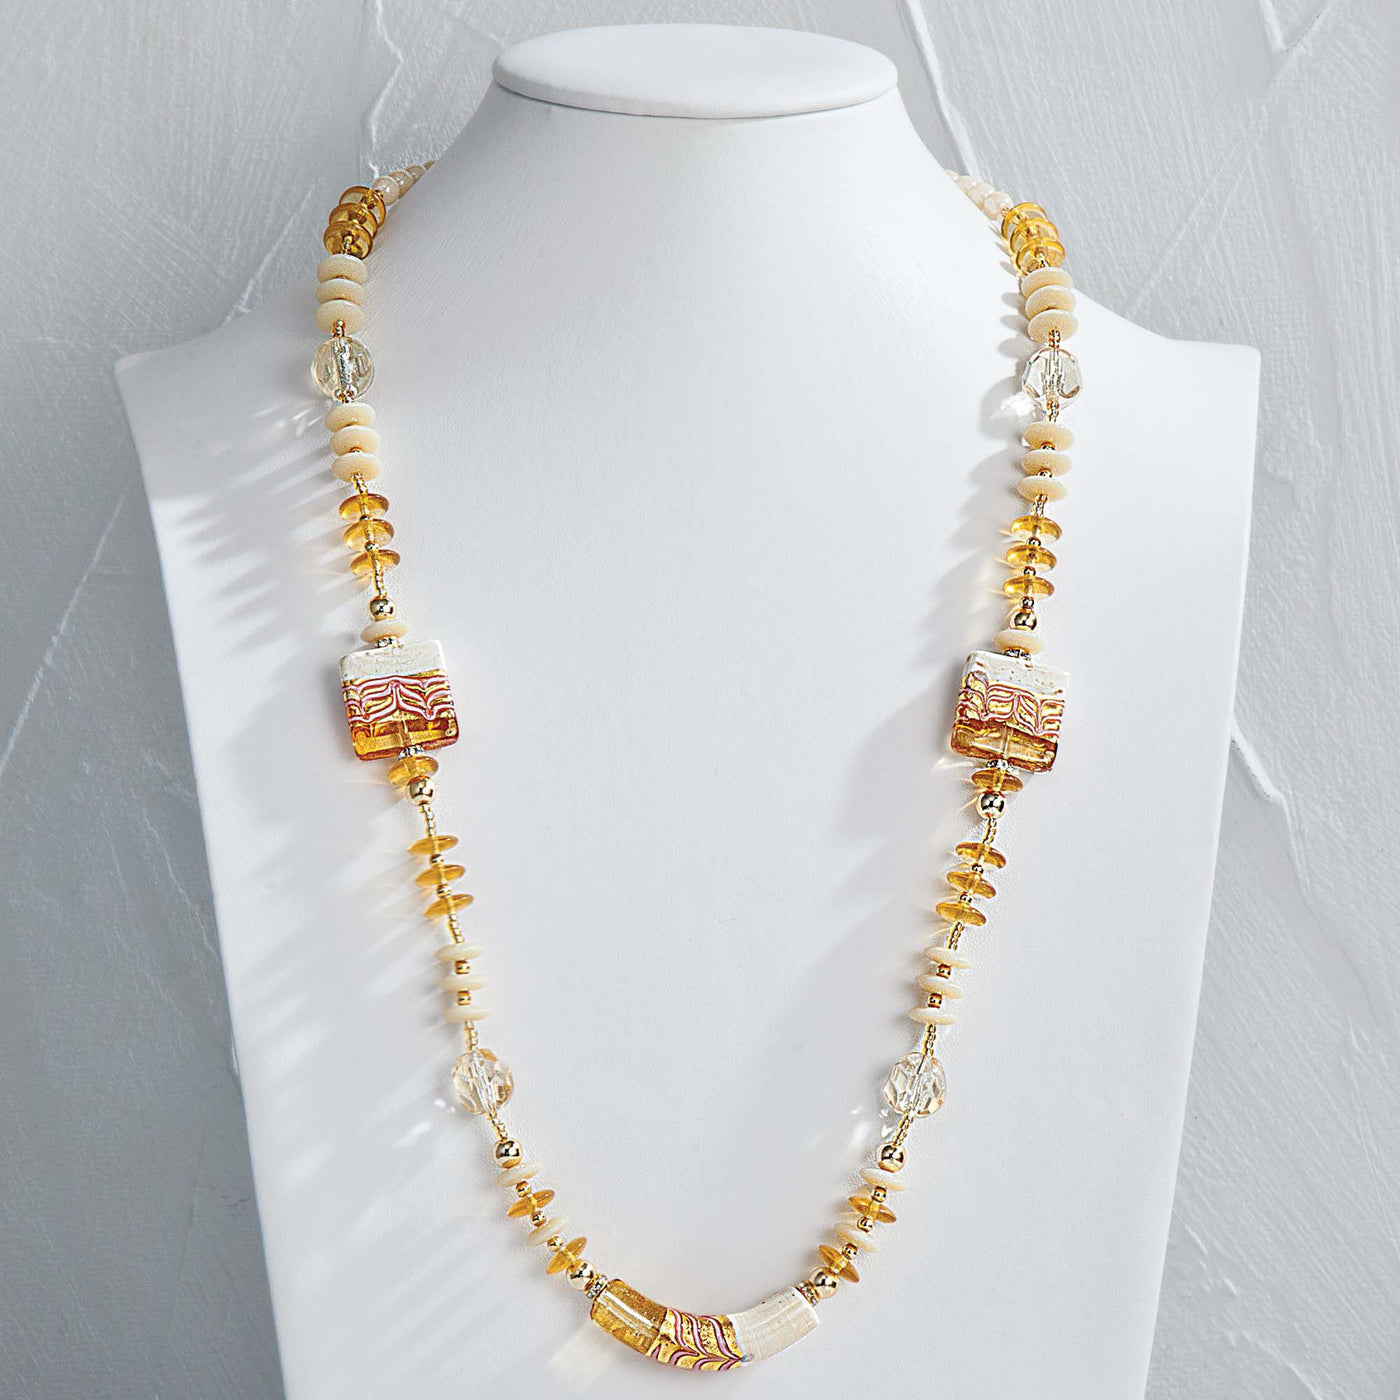 Ivory Murano Glass Square Beaded Necklace